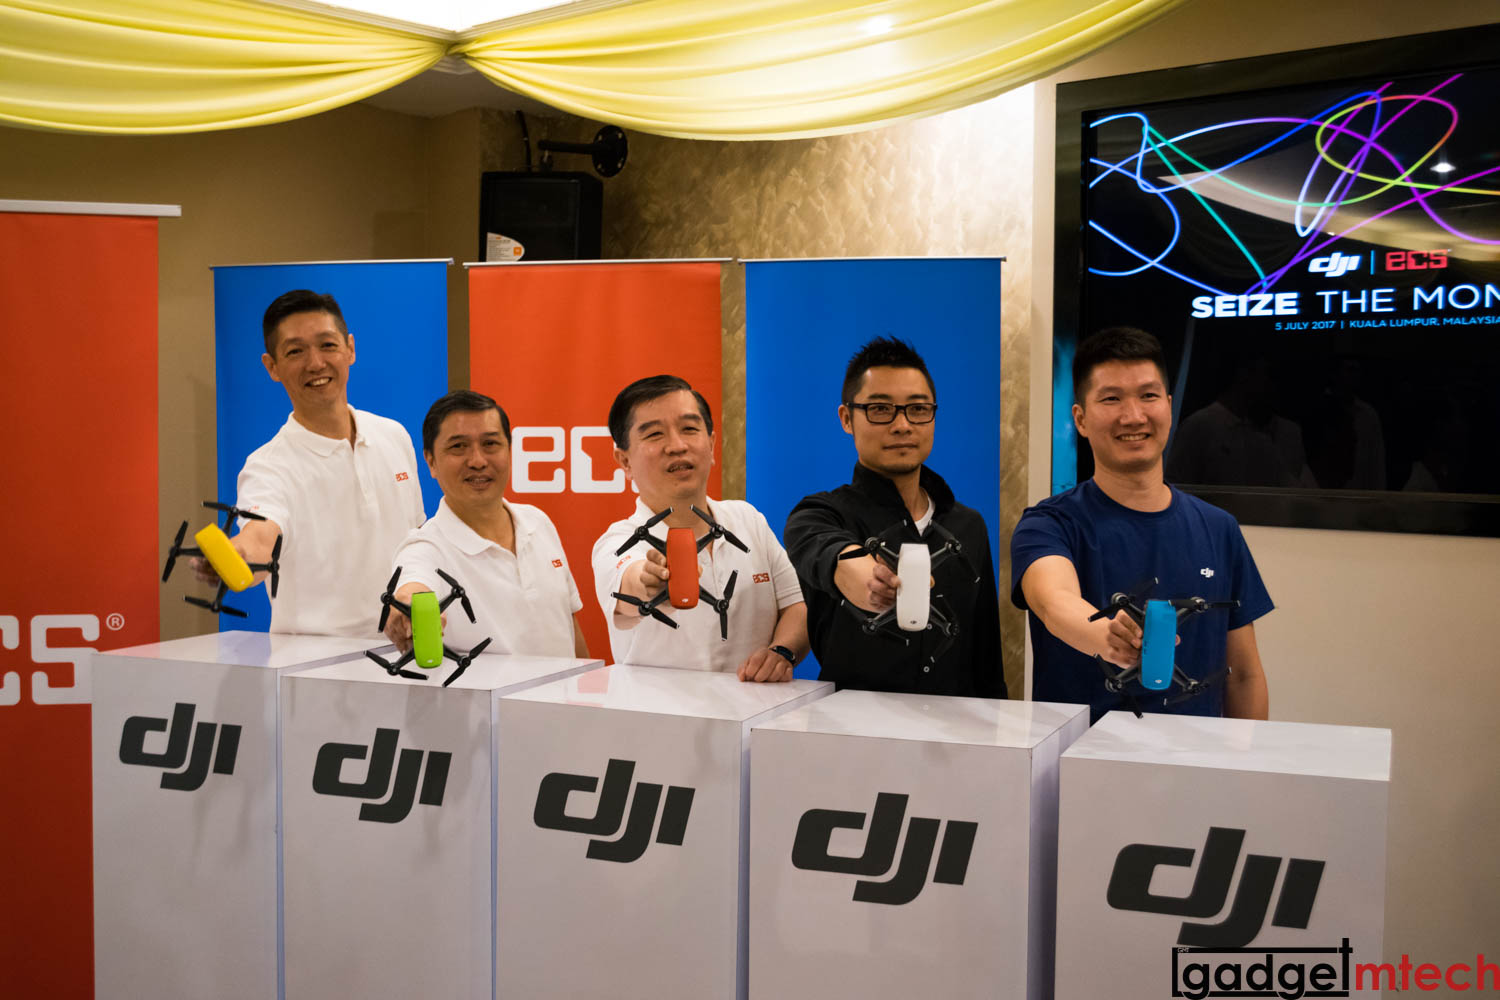 DJI Spark Officially Launched in Malaysia